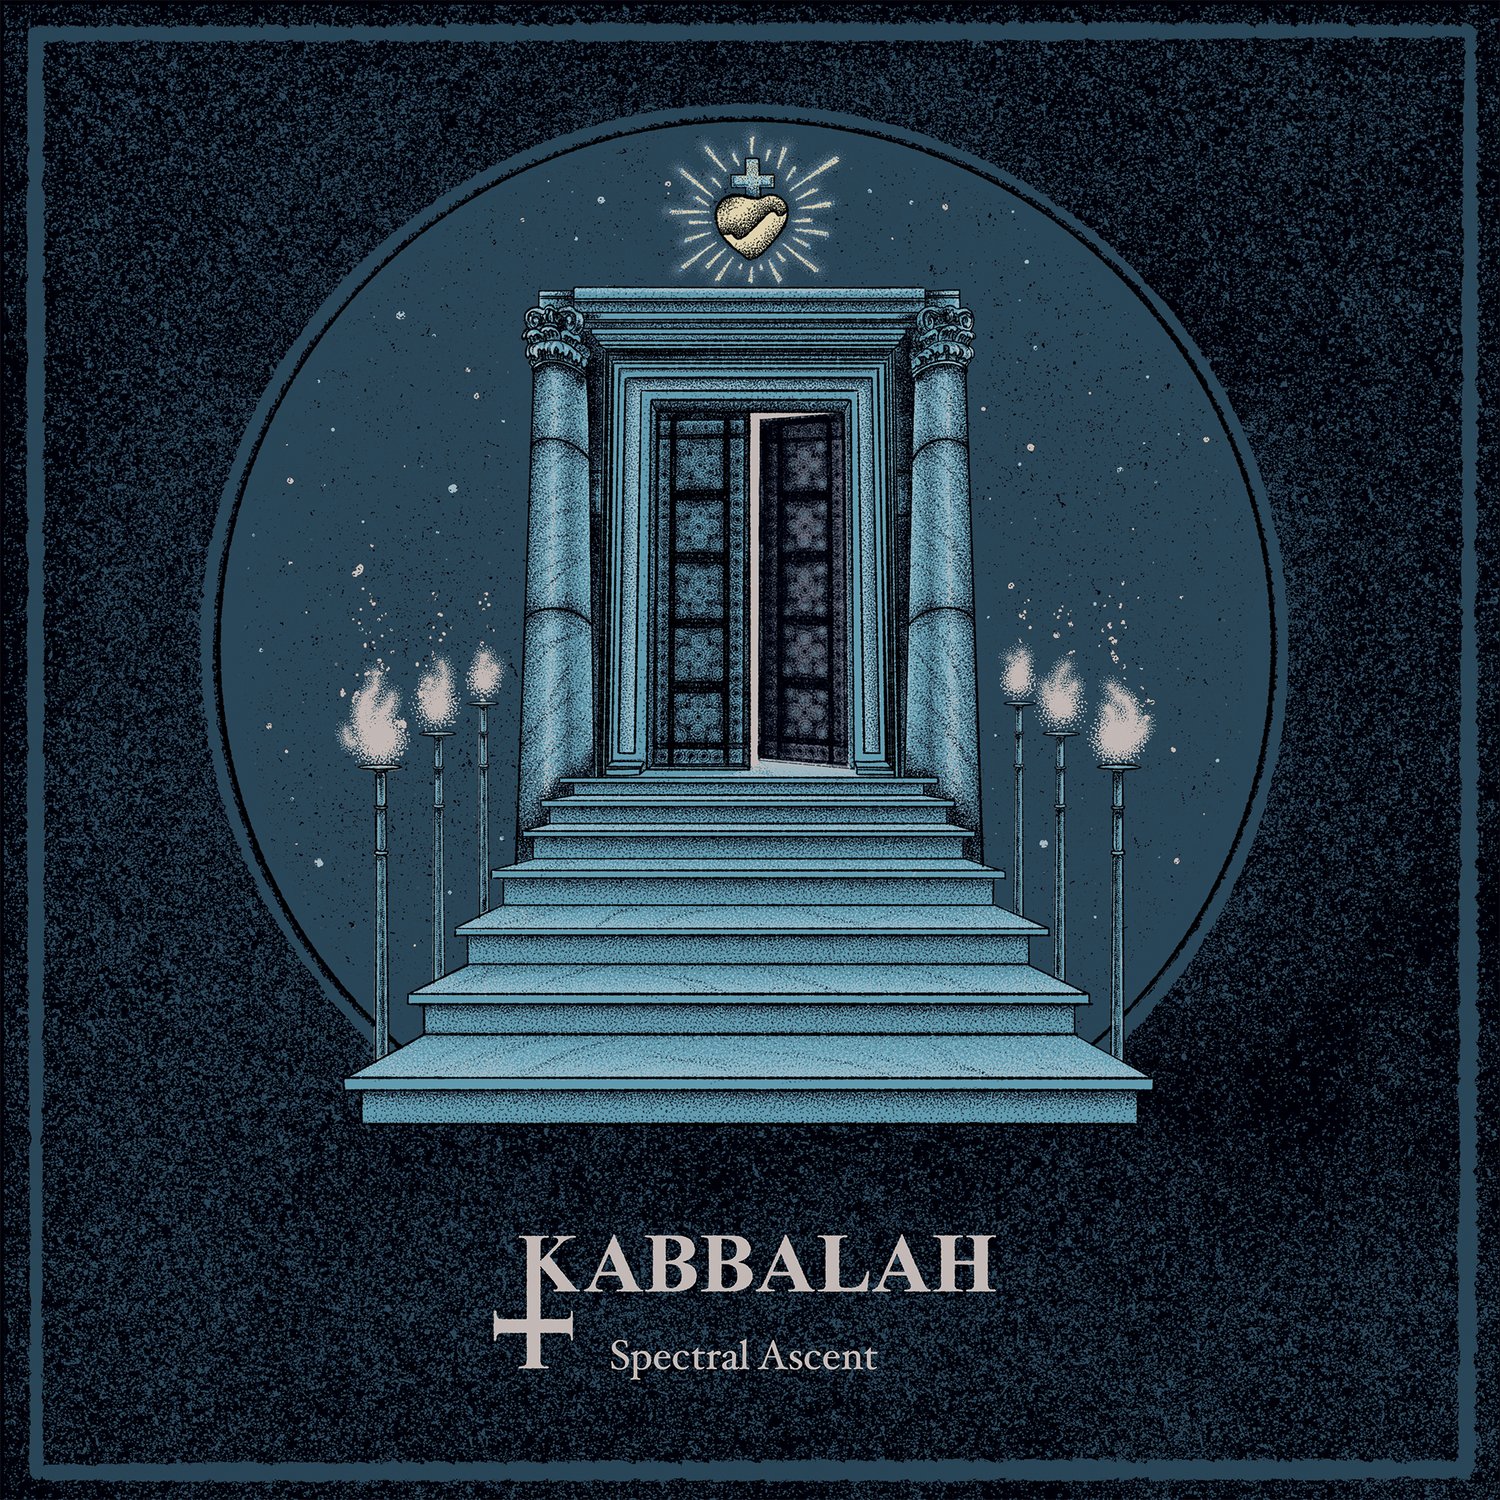 Image of Kabbalah - Spectral Ascent Limited Edition Vinyl LP (Reissue)